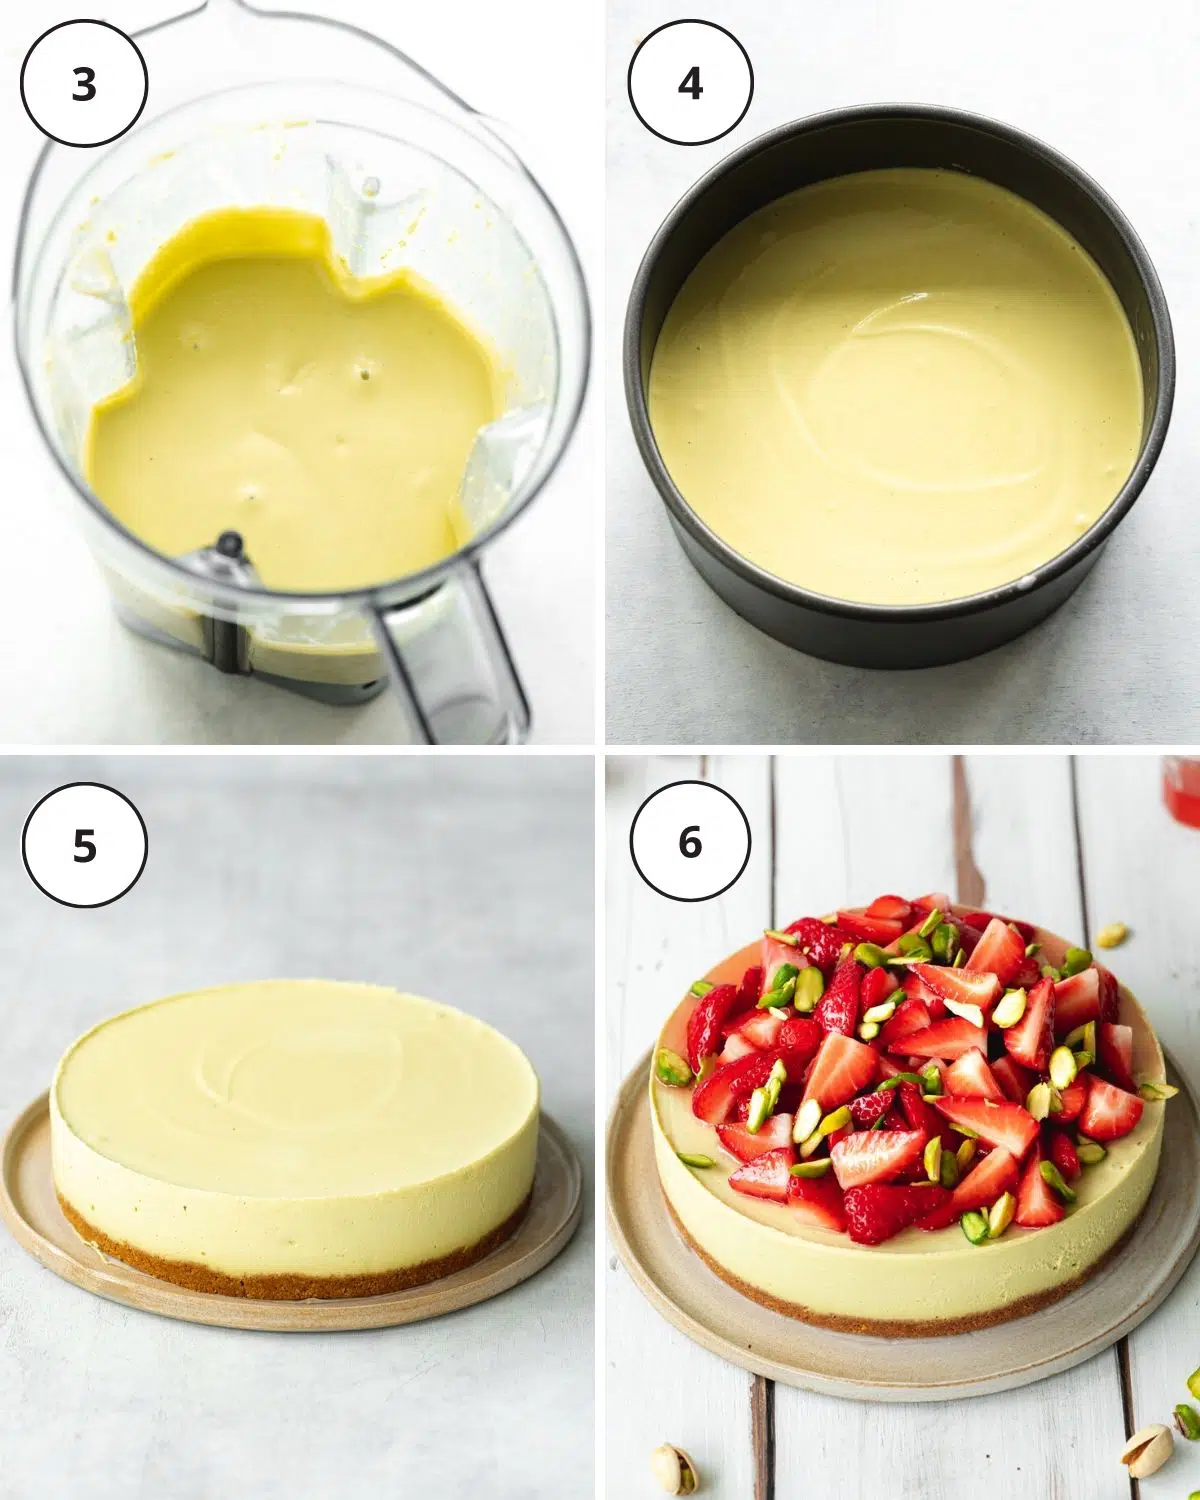 pistachio cheesecake in a blender, in a cake tin, and topped with fresh strawberries.